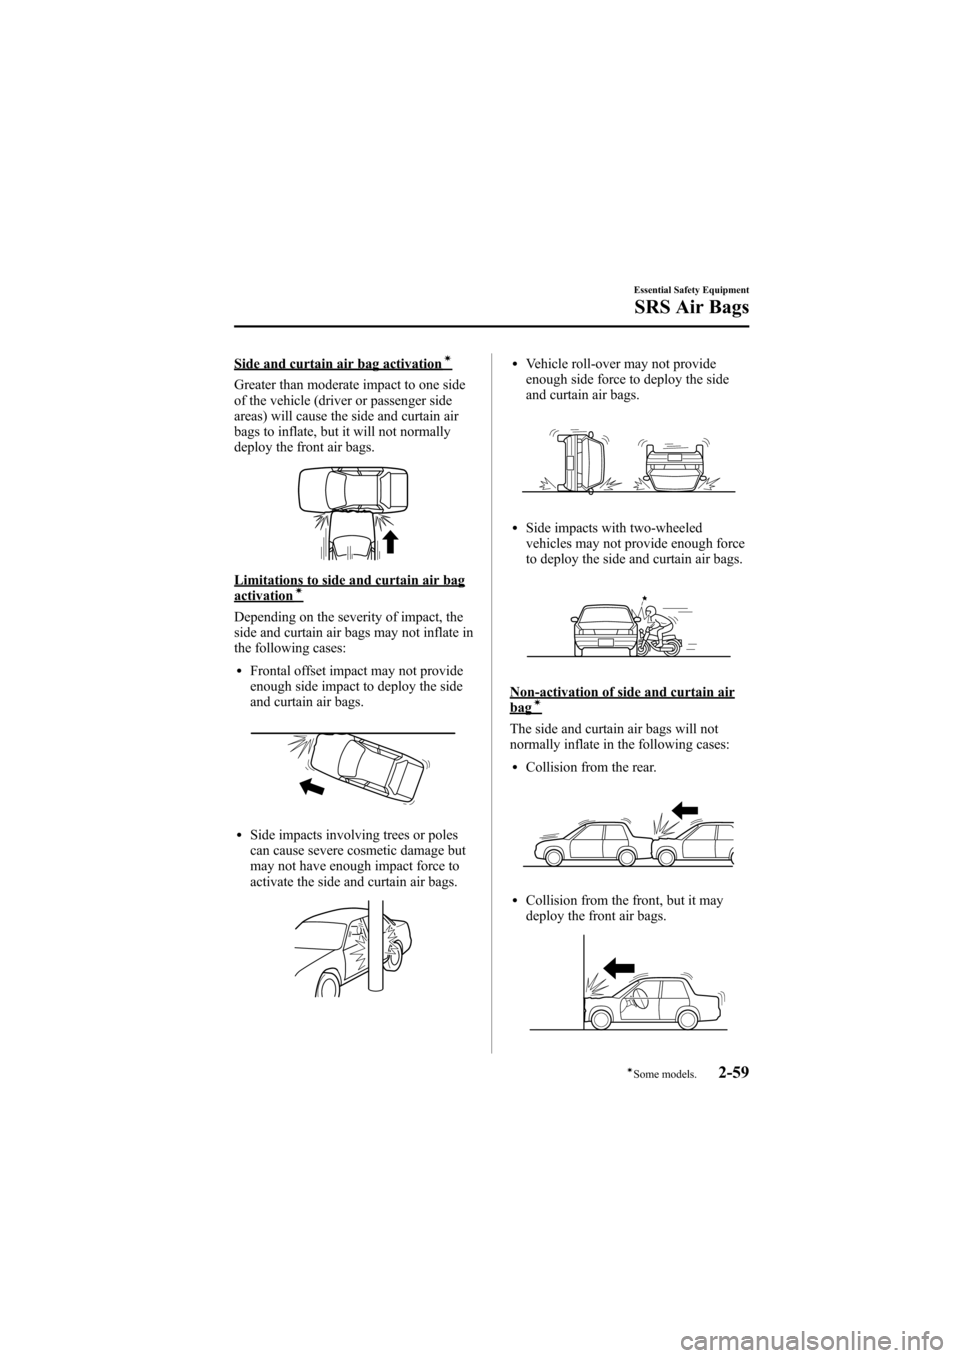 MAZDA MODEL 6 2005   (in English) Manual PDF Black plate (73,1)
Side and curtain air bag activationí
Greater than moderate impact to one side
of the vehicle (driver or passenger side
areas) will cause the side and curtain air
bags to inflate, b